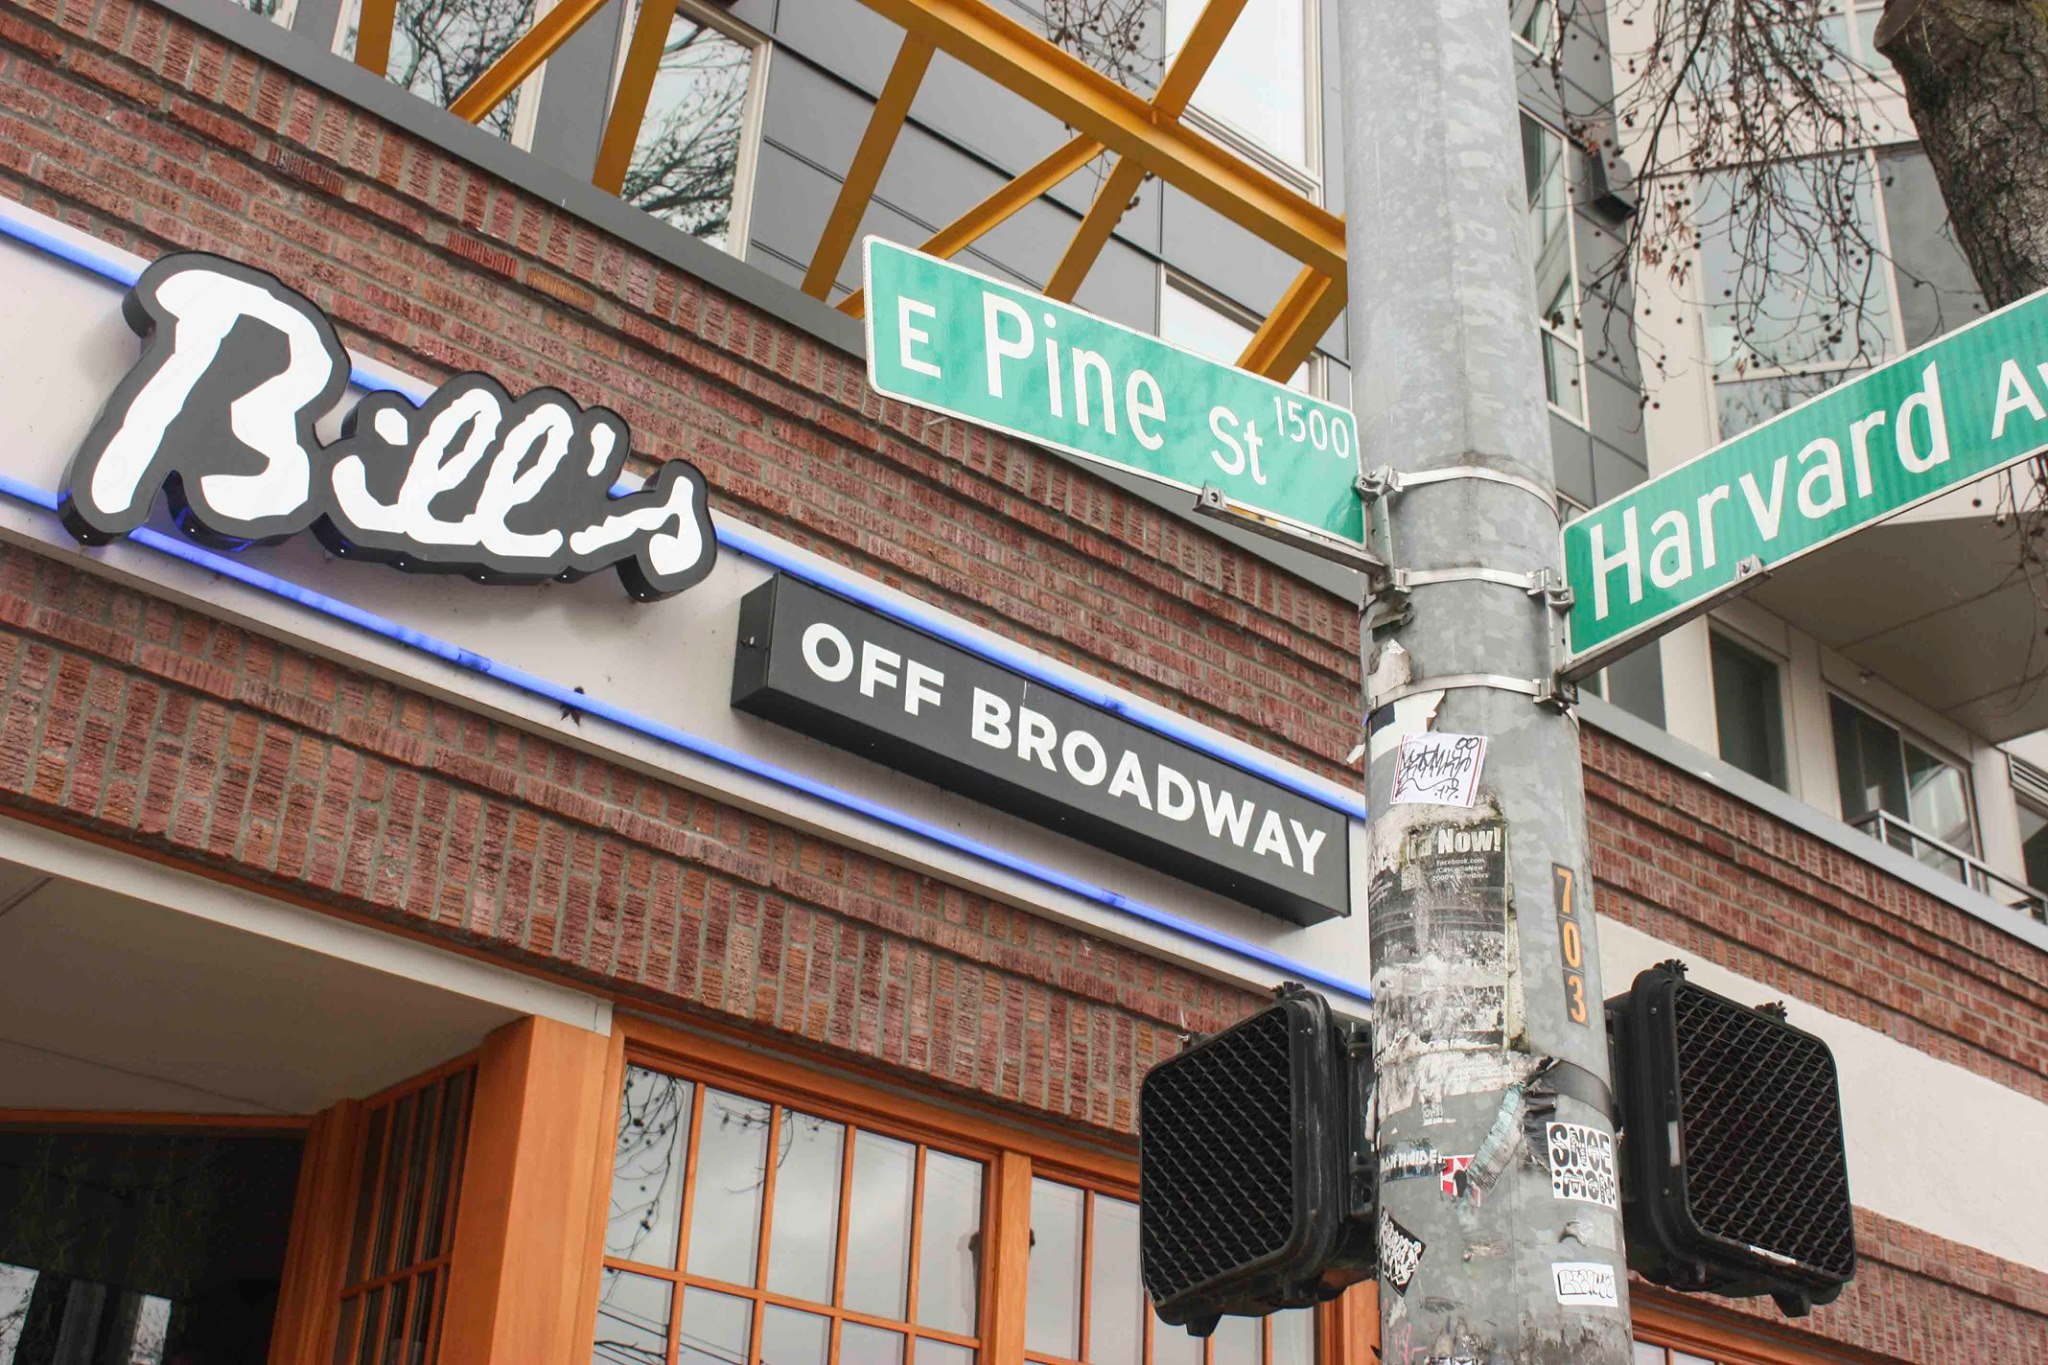 The front of Bill’s Off Broadway, with the street signs Pine Street and Harvard Avenue in the foreground